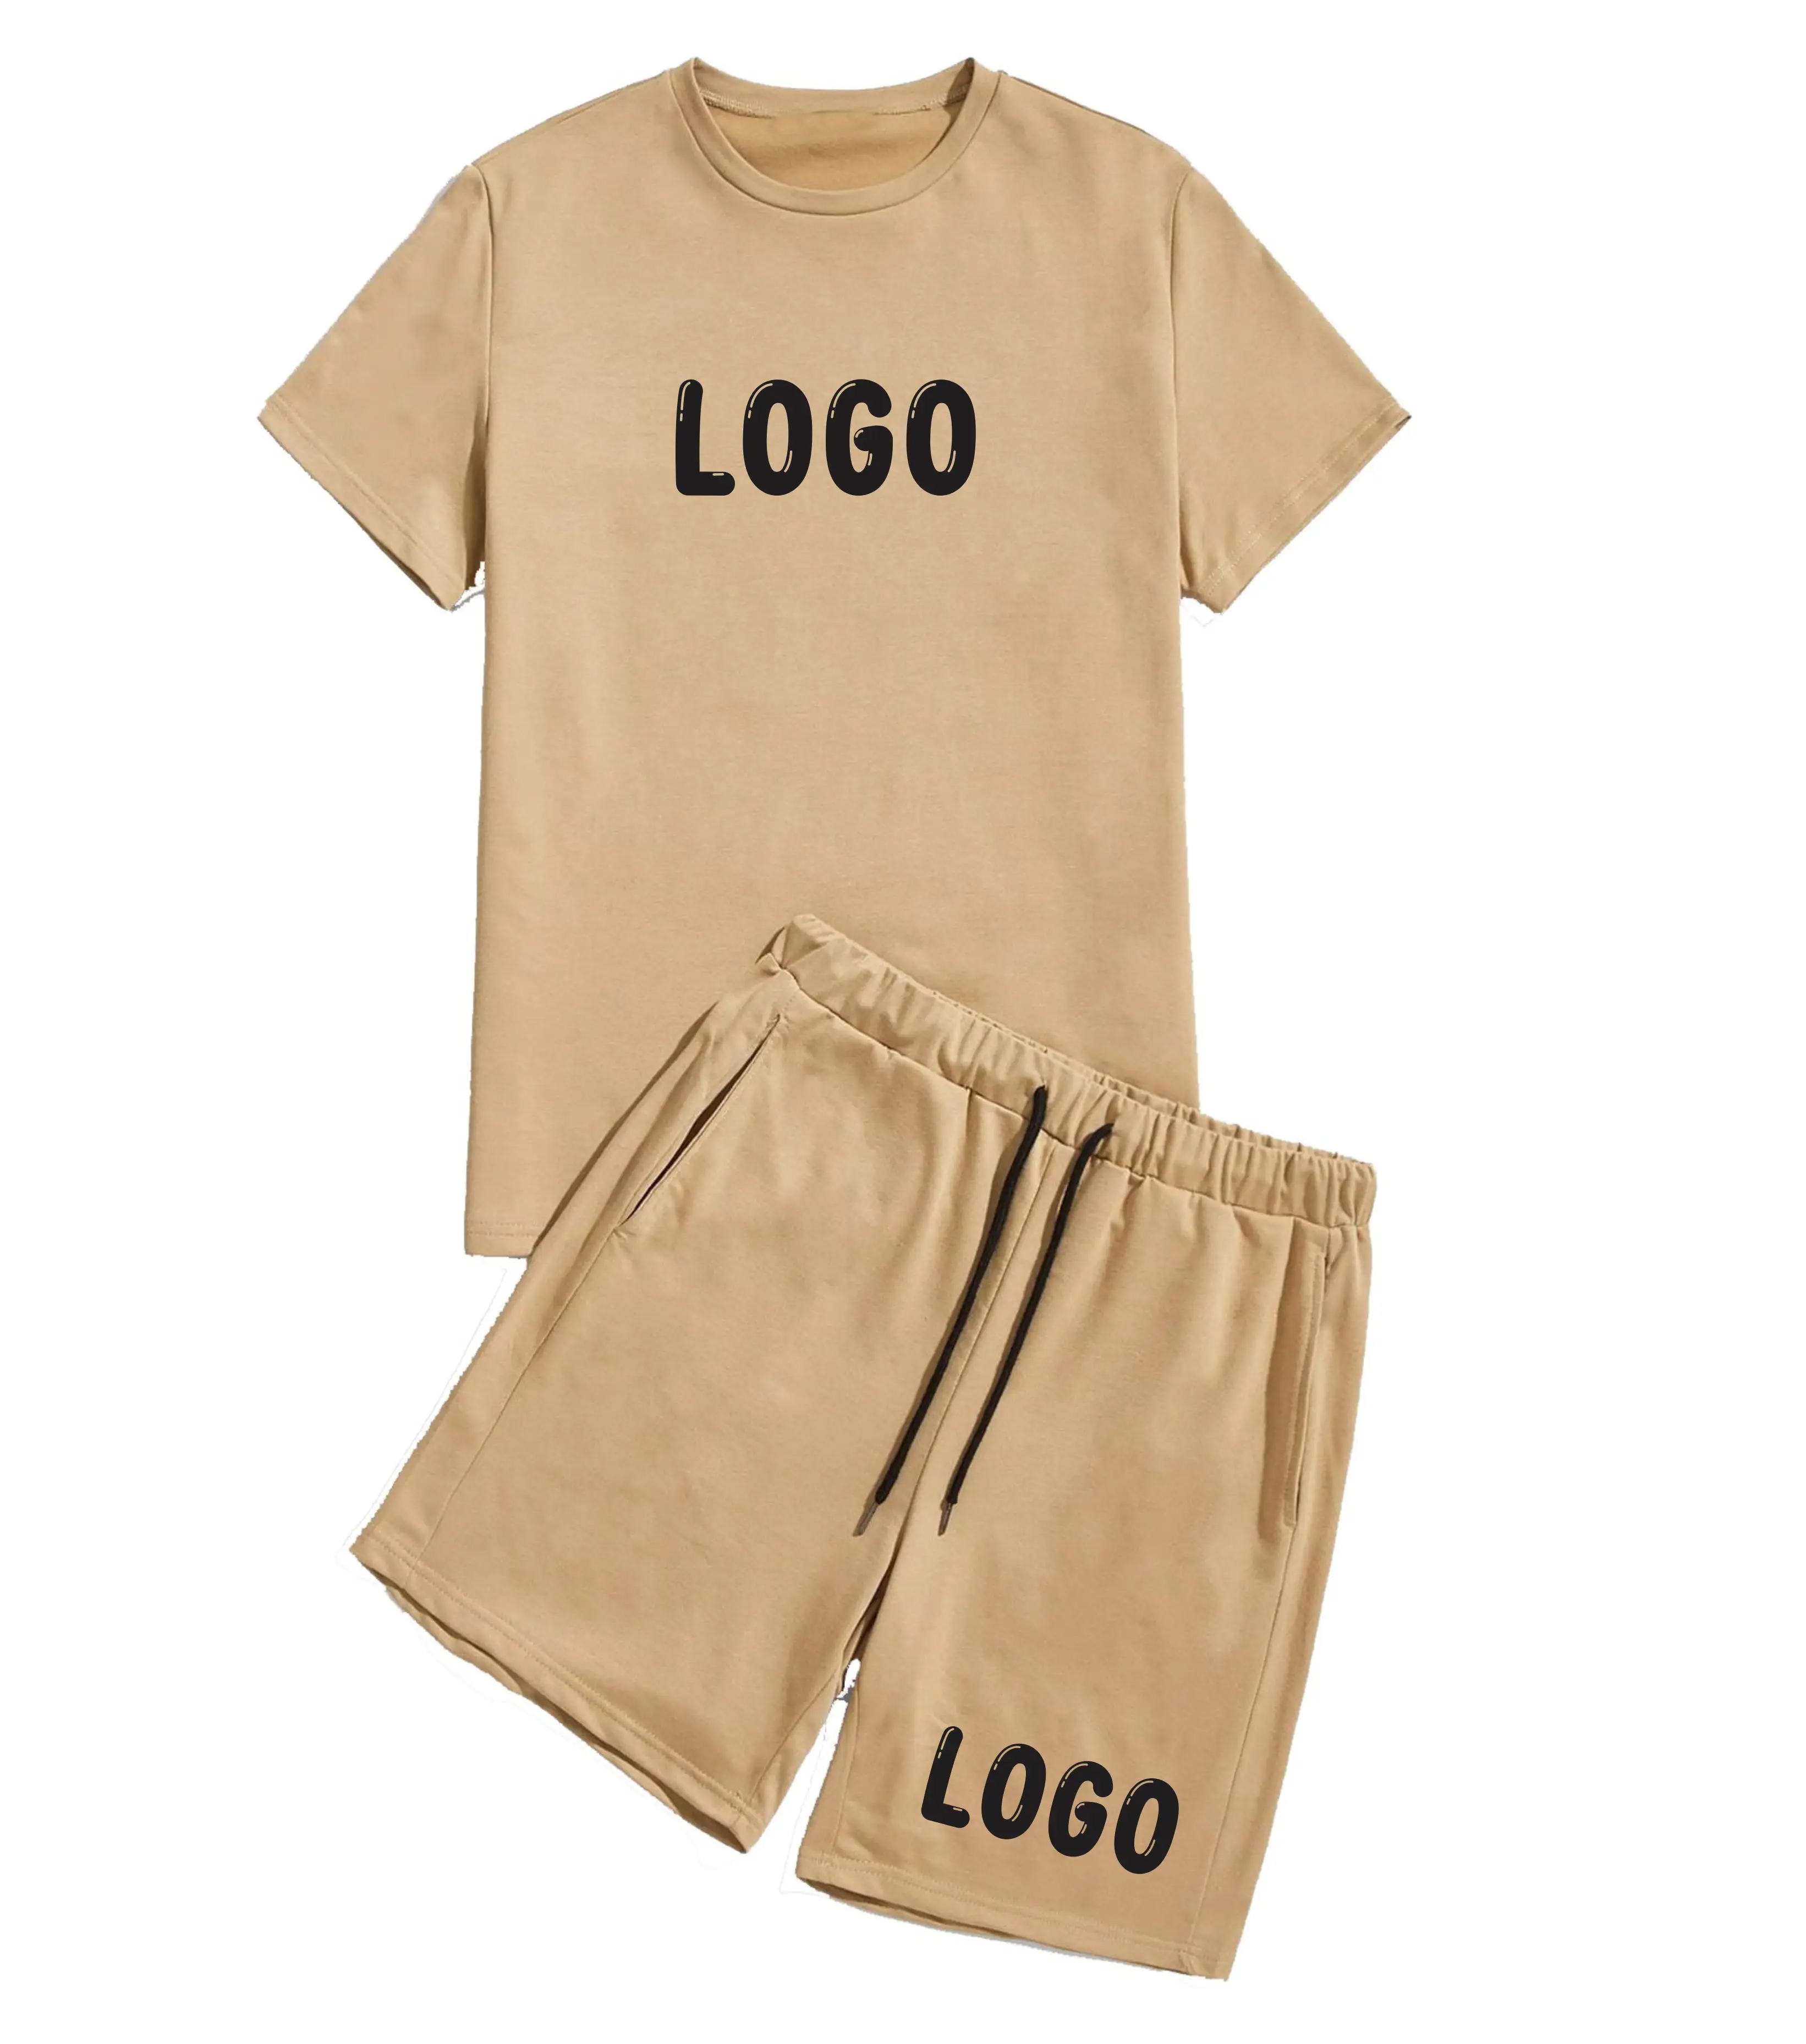 Wholesale Cheap Slim fit Men twin set custom Tshirt family outfit matching t shirts With Shorts